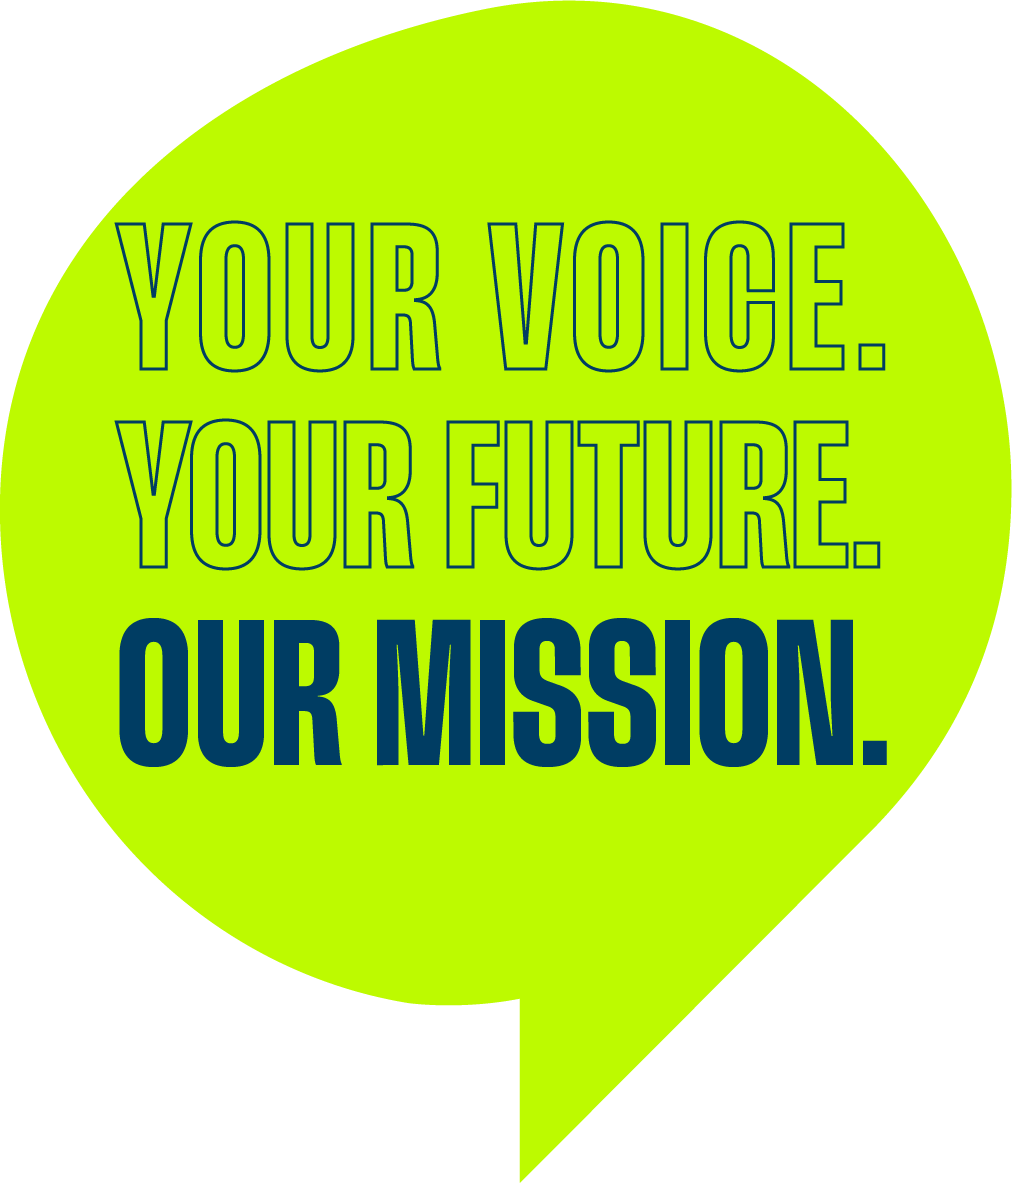 Your voice. Your future. Our Mission.